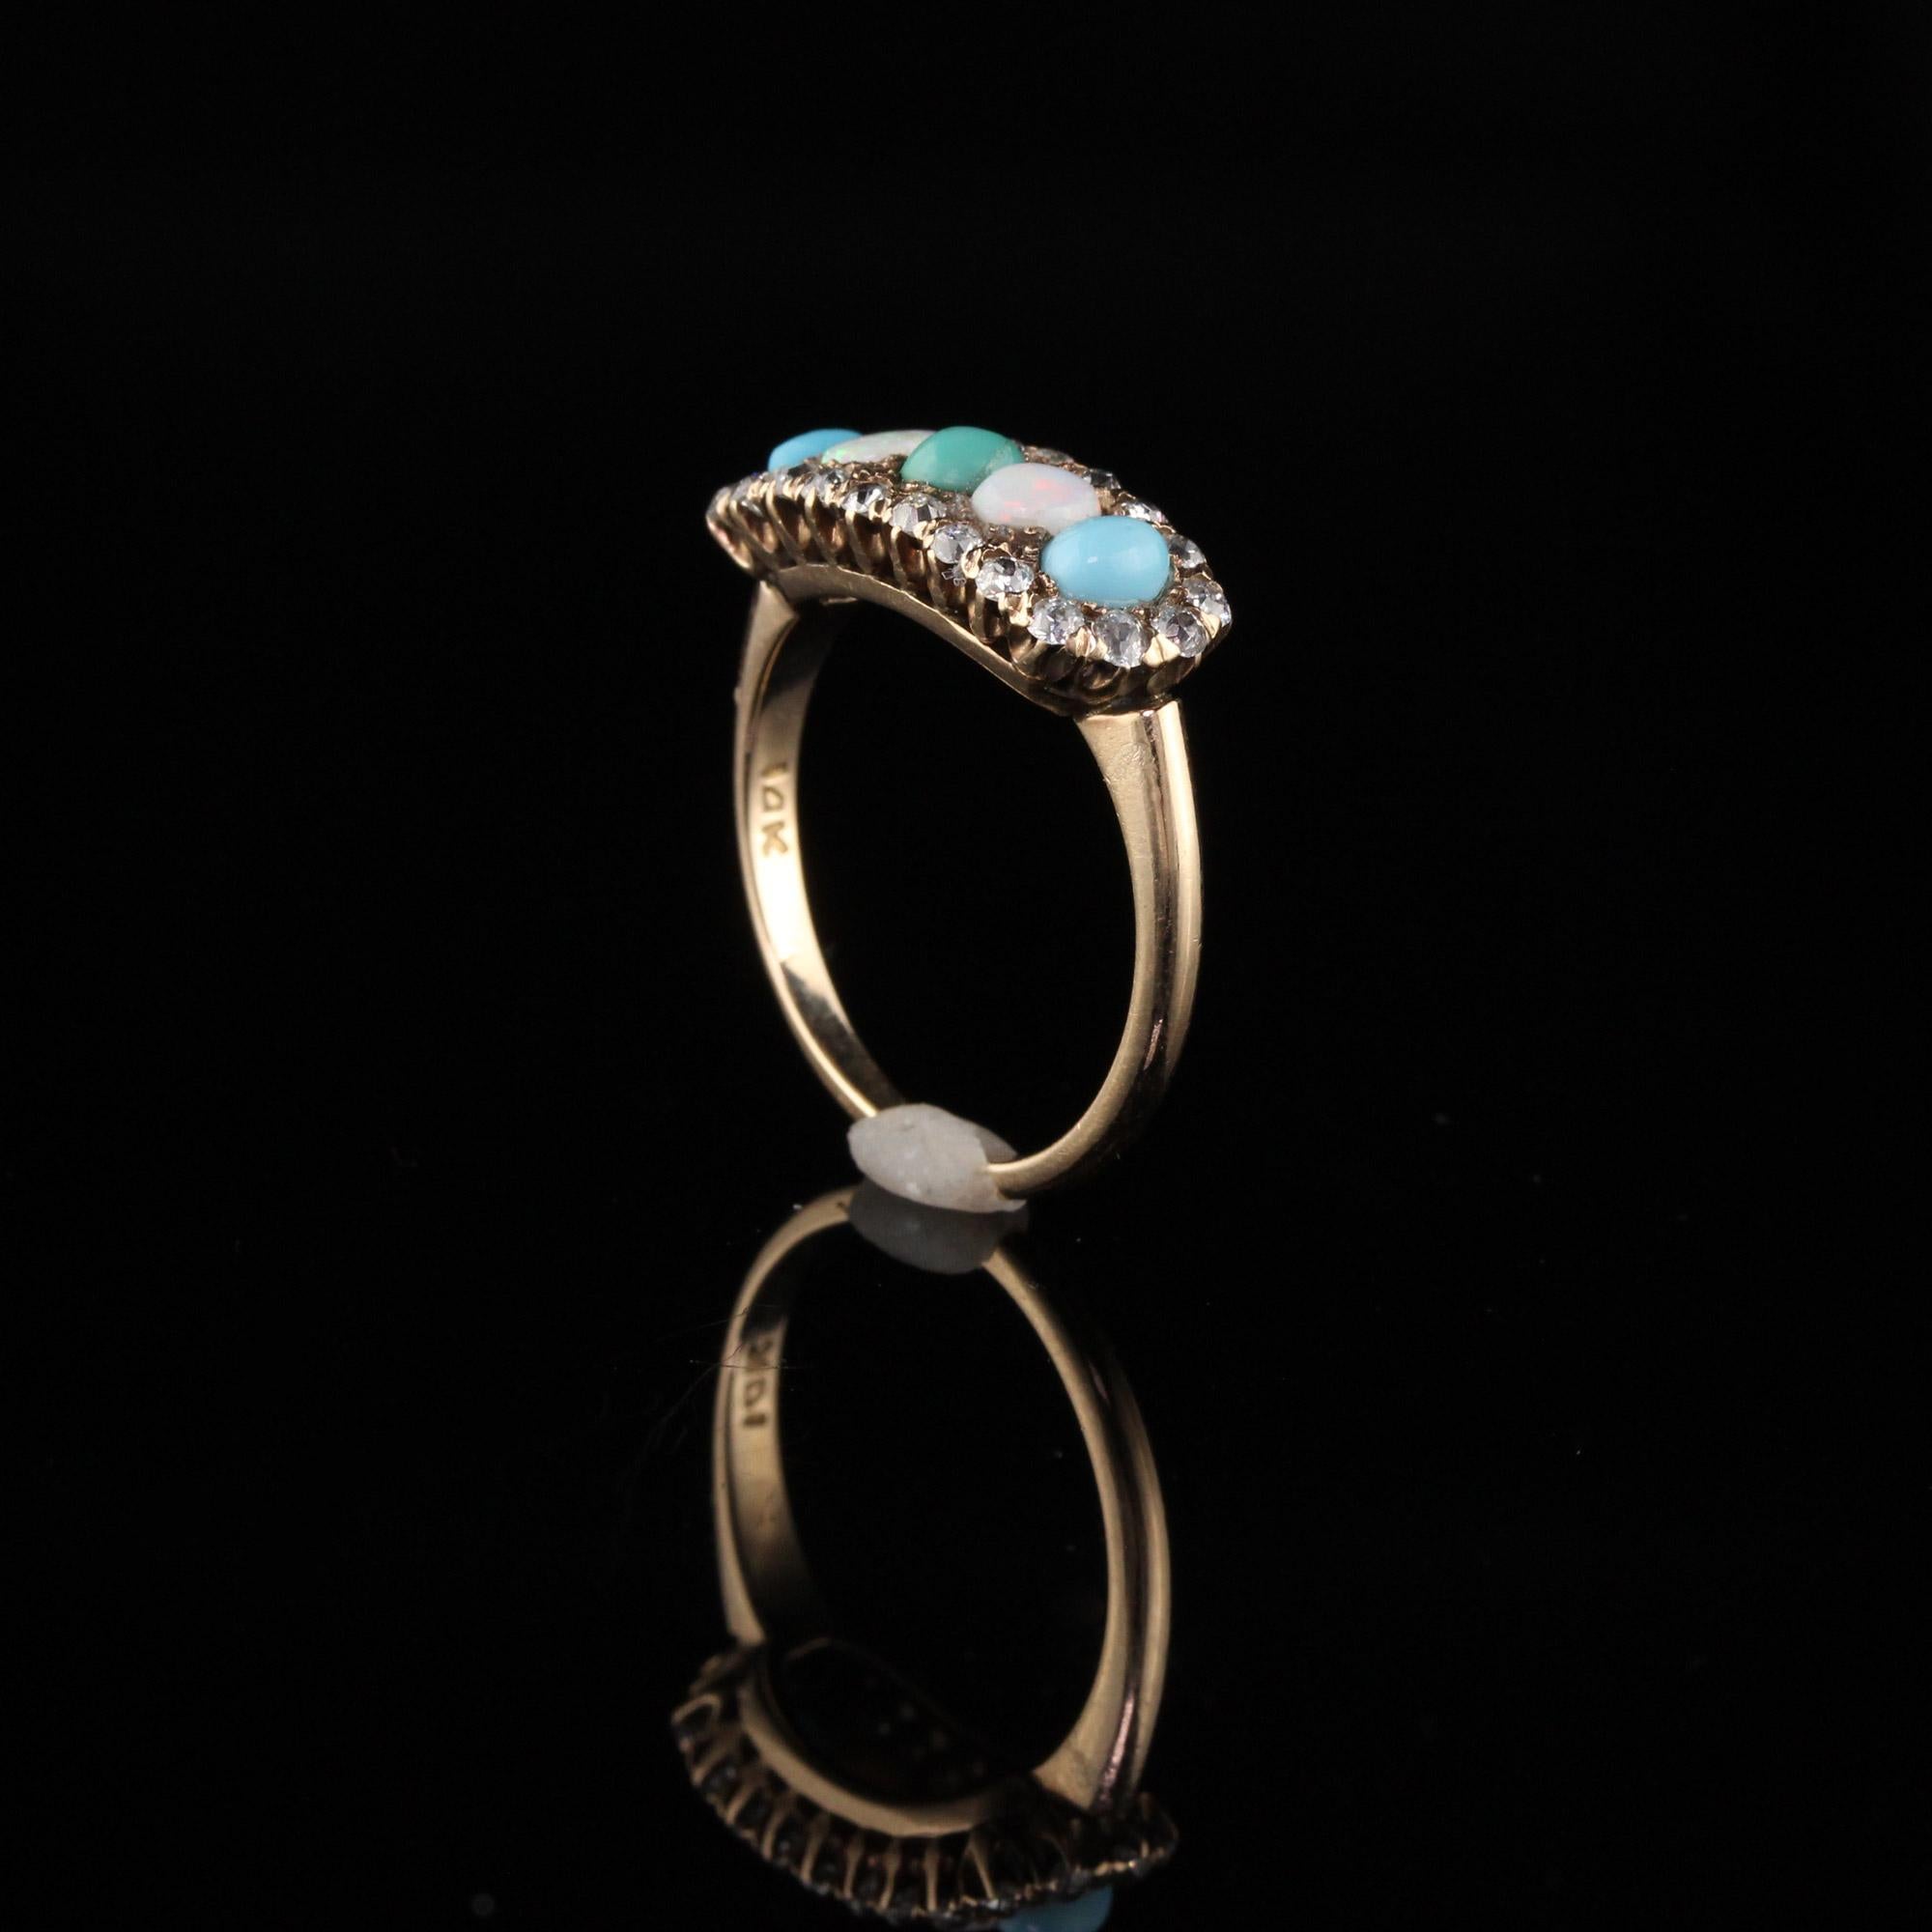 Women's or Men's Antique Victorian Old Mine Cut Diamond, Opal, and Turquoise Ring